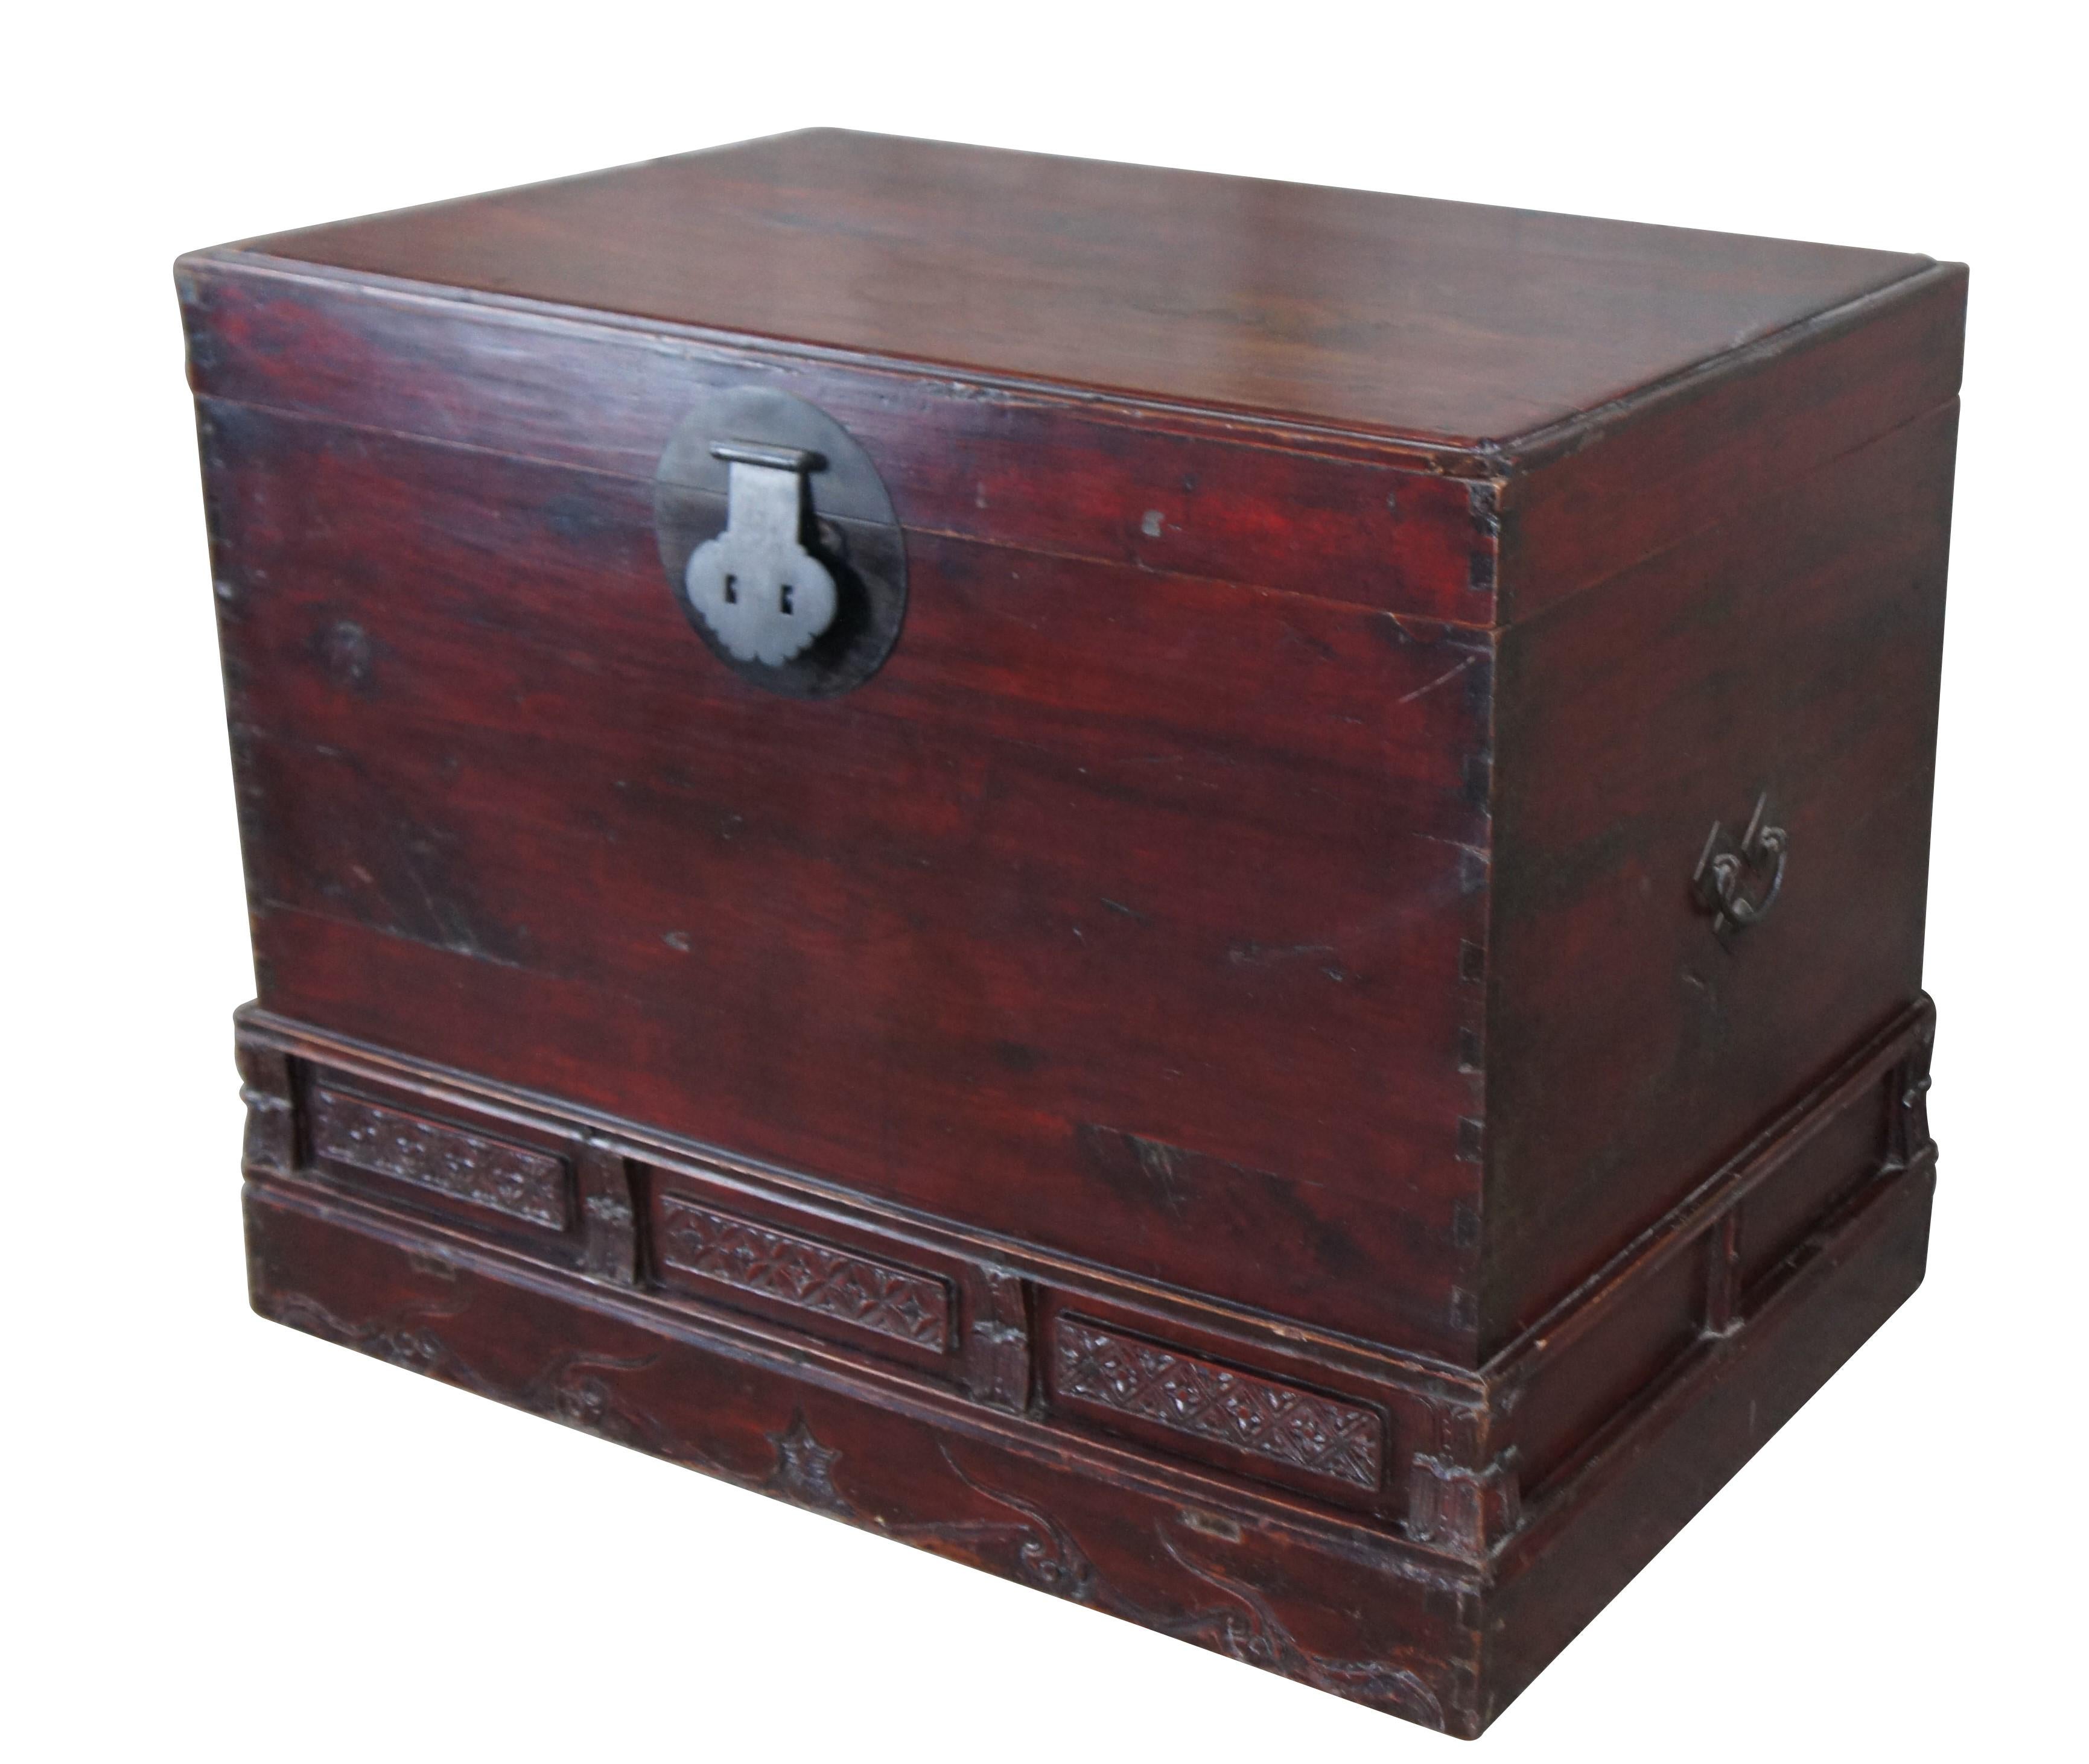 Late Qing Dynasty Red Lacquered Elm Trunk.  Made in Shandong East China, late 19th century.  Feature a rectangular body with dovetail construction at the corners and lower carved relief.  The trunk has traditional moon hardware at the center,